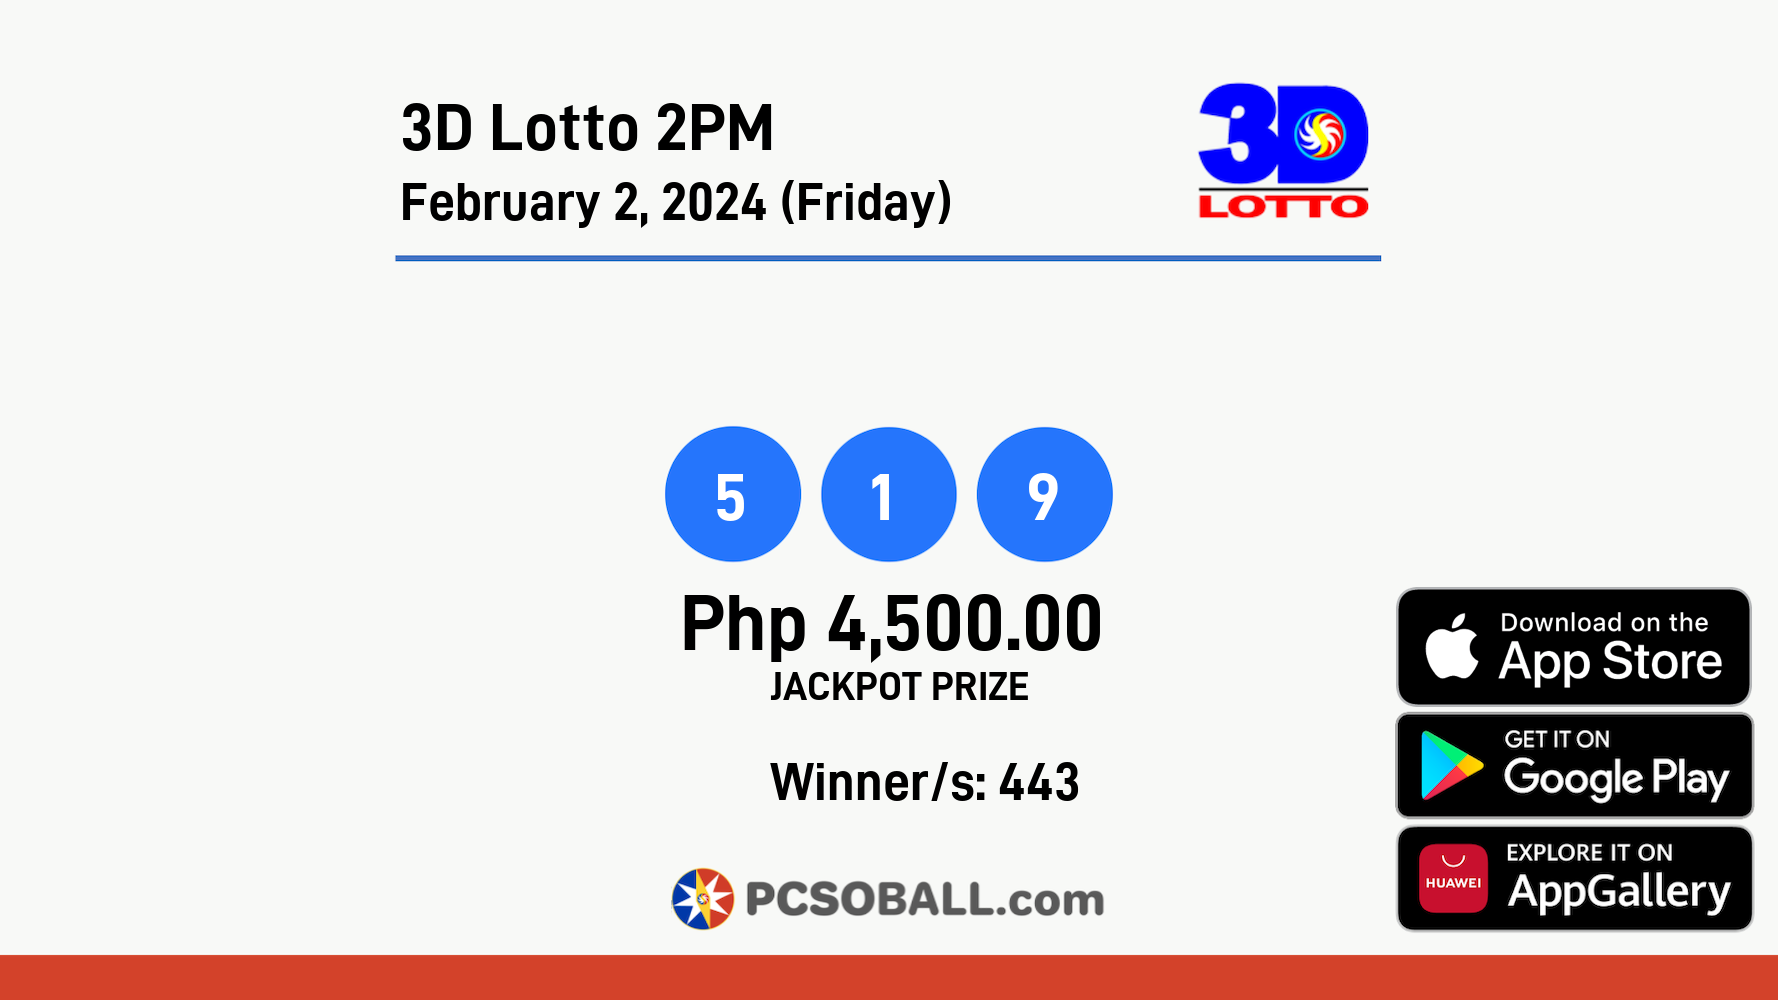 3D Lotto 2PM February 2, 2024 (Friday) Result